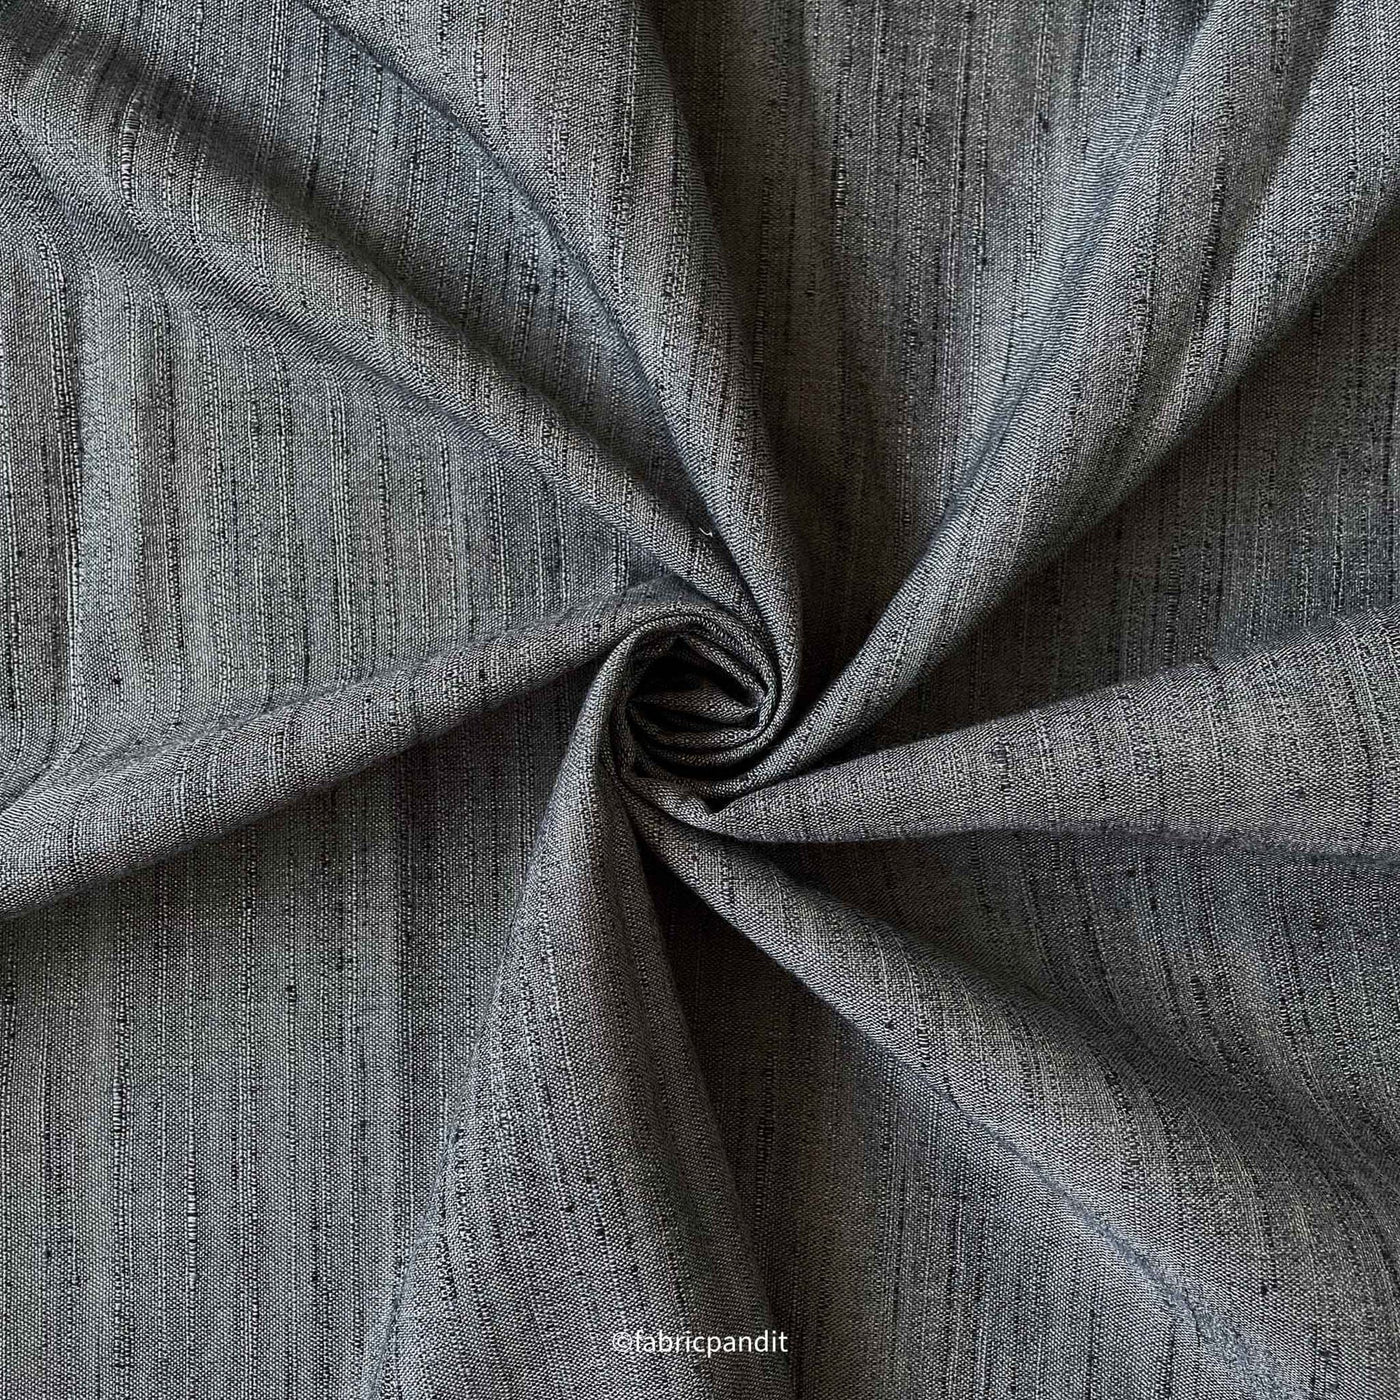 Charcoal Grey Color Pure Rayon Fabric – Fabric Pandit